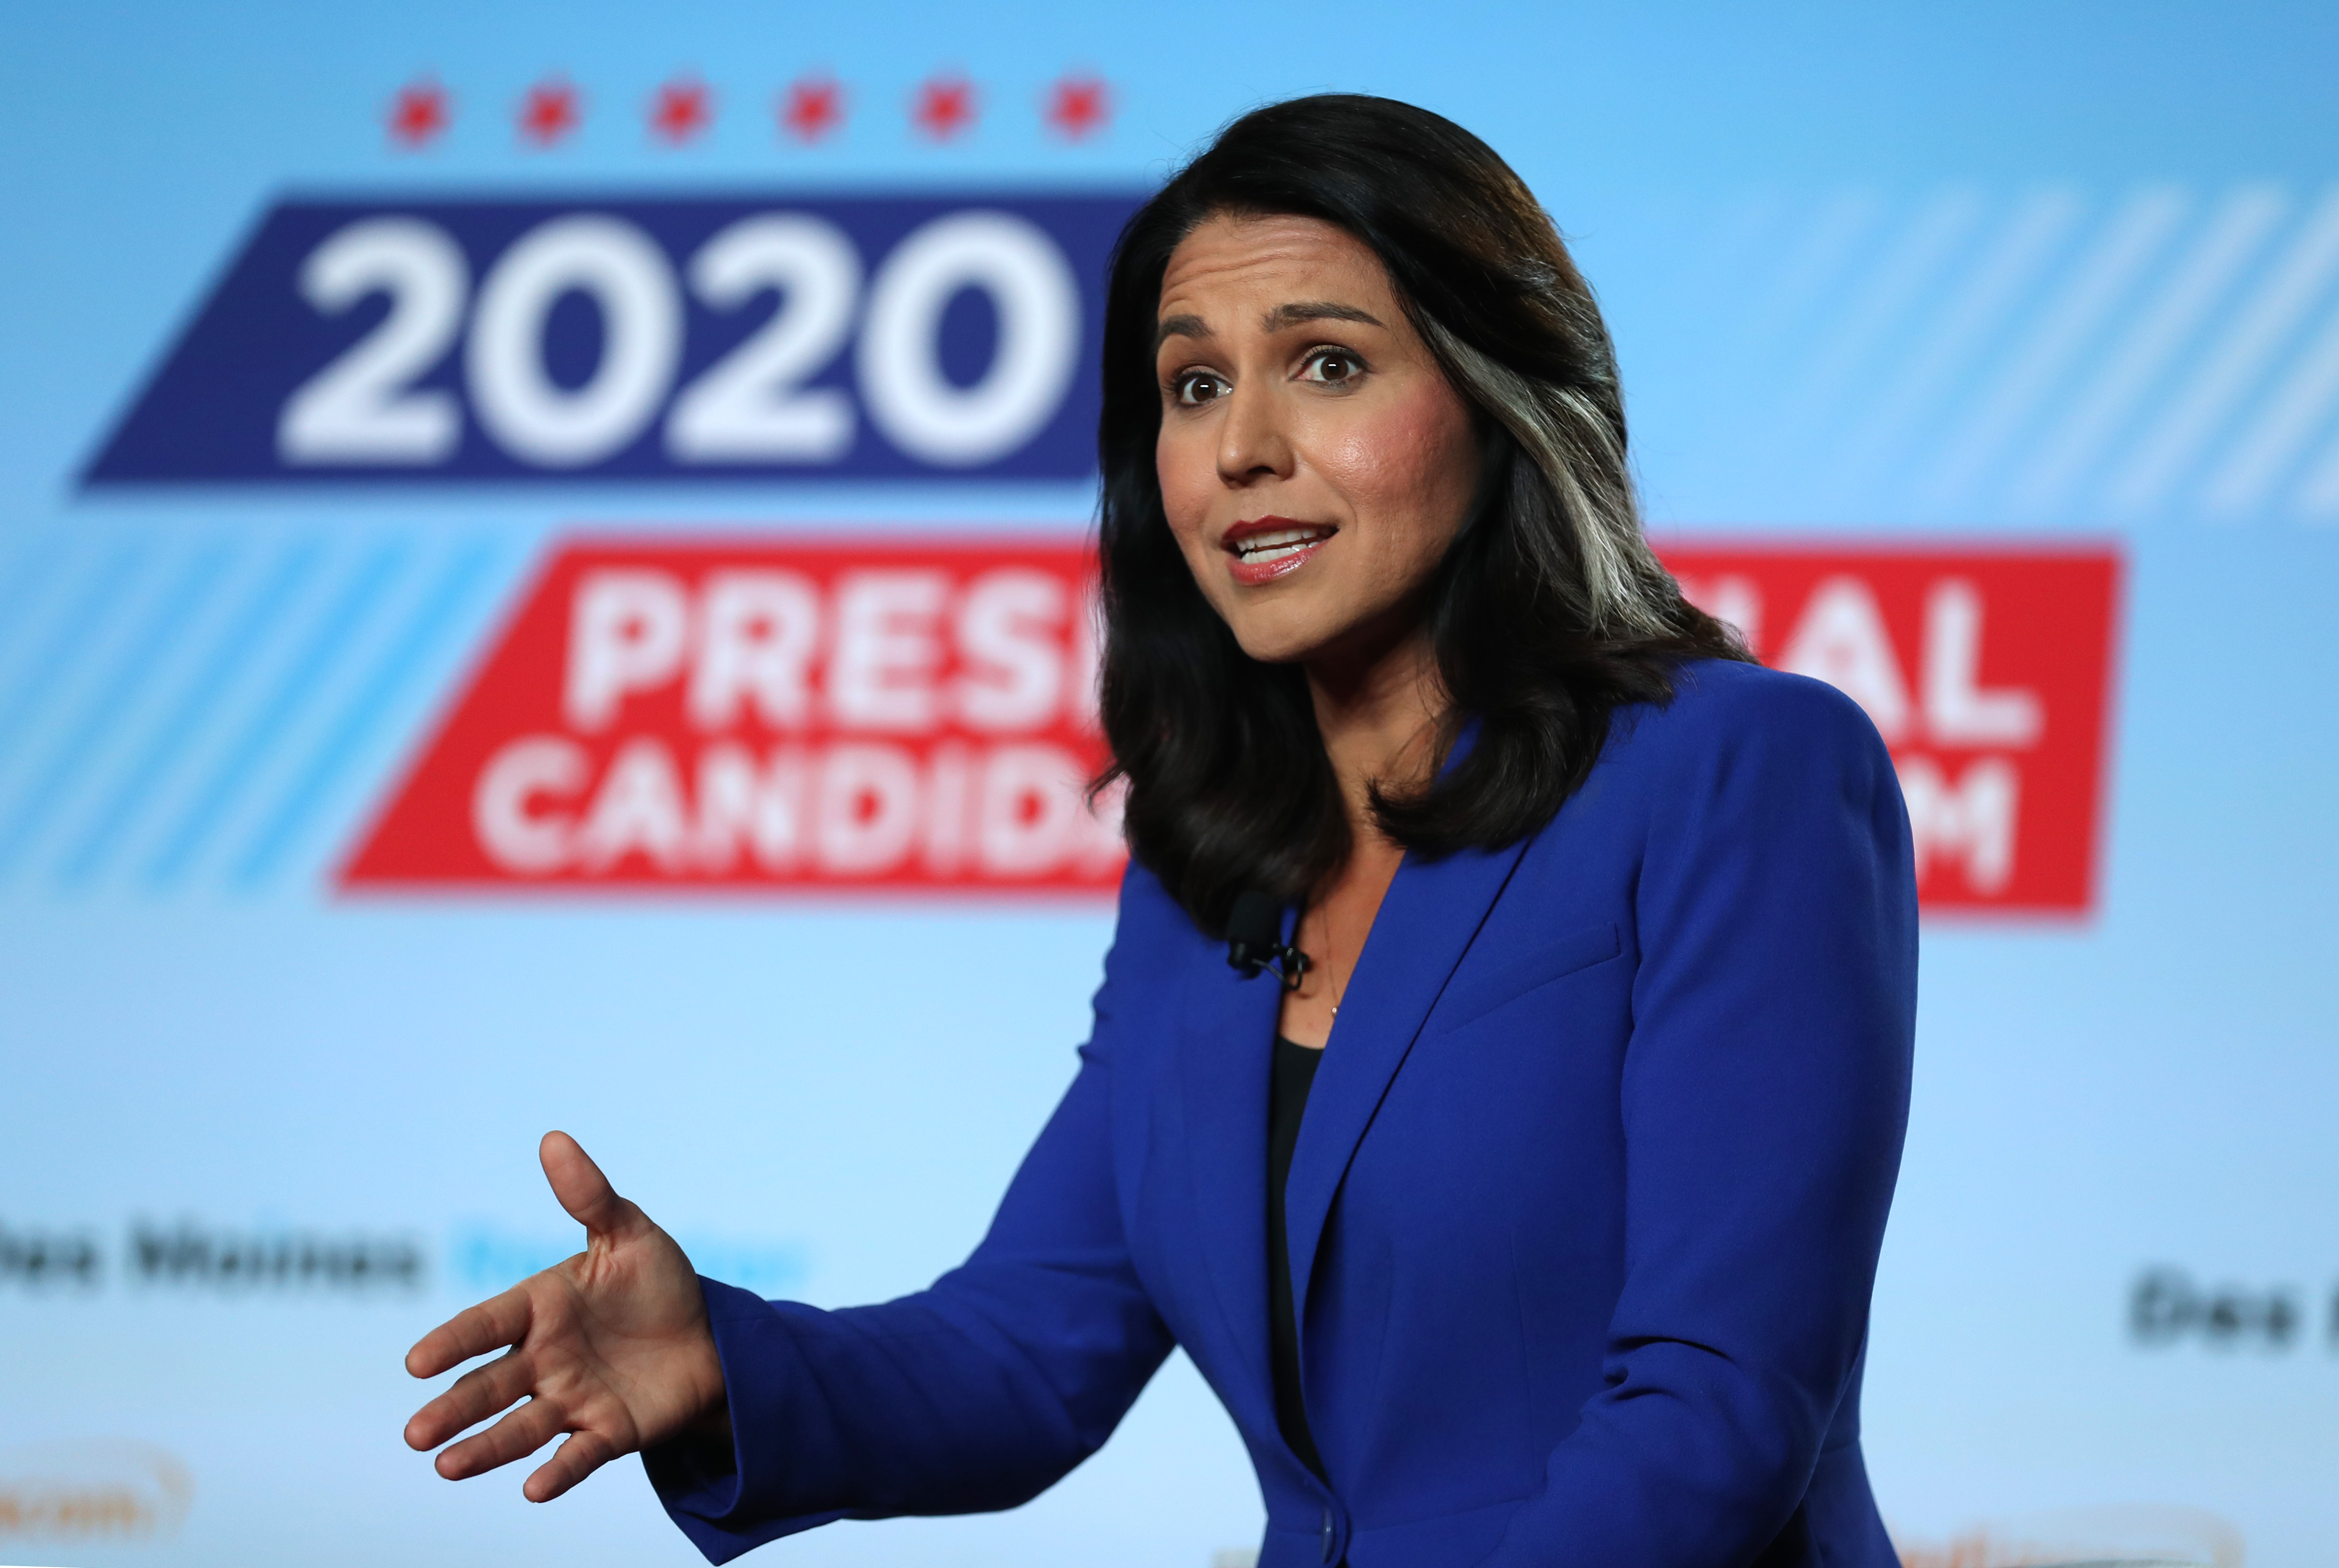 Presidential candidate Tulsi Gabbard sues Google for ad censorship | Ars Technica